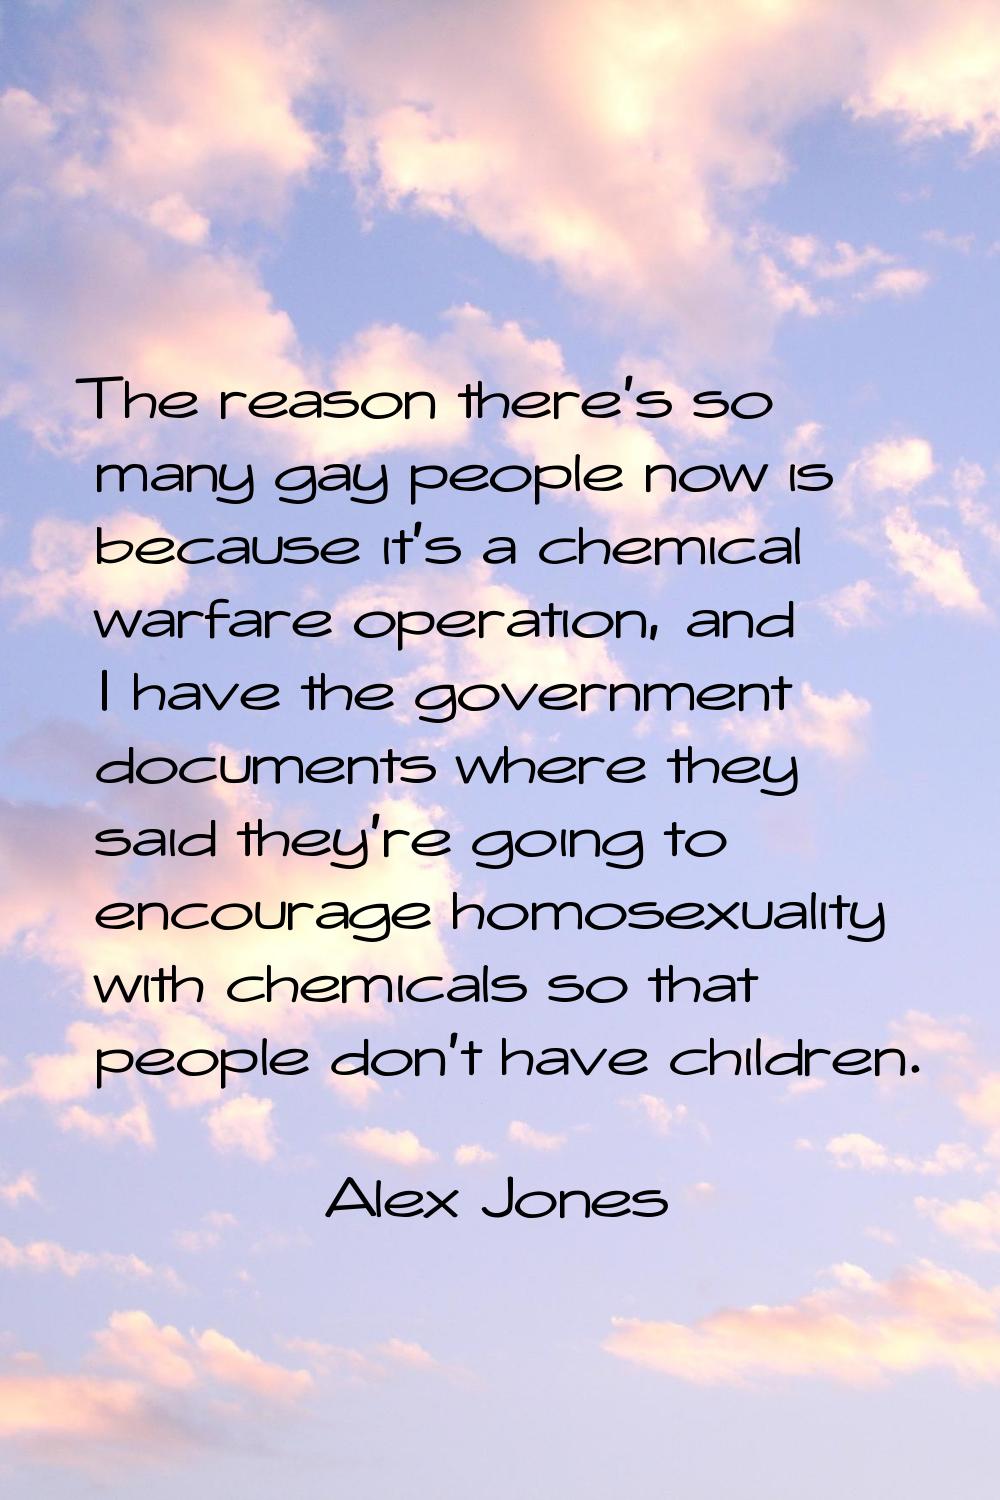 The reason there's so many gay people now is because it's a chemical warfare operation, and I have 